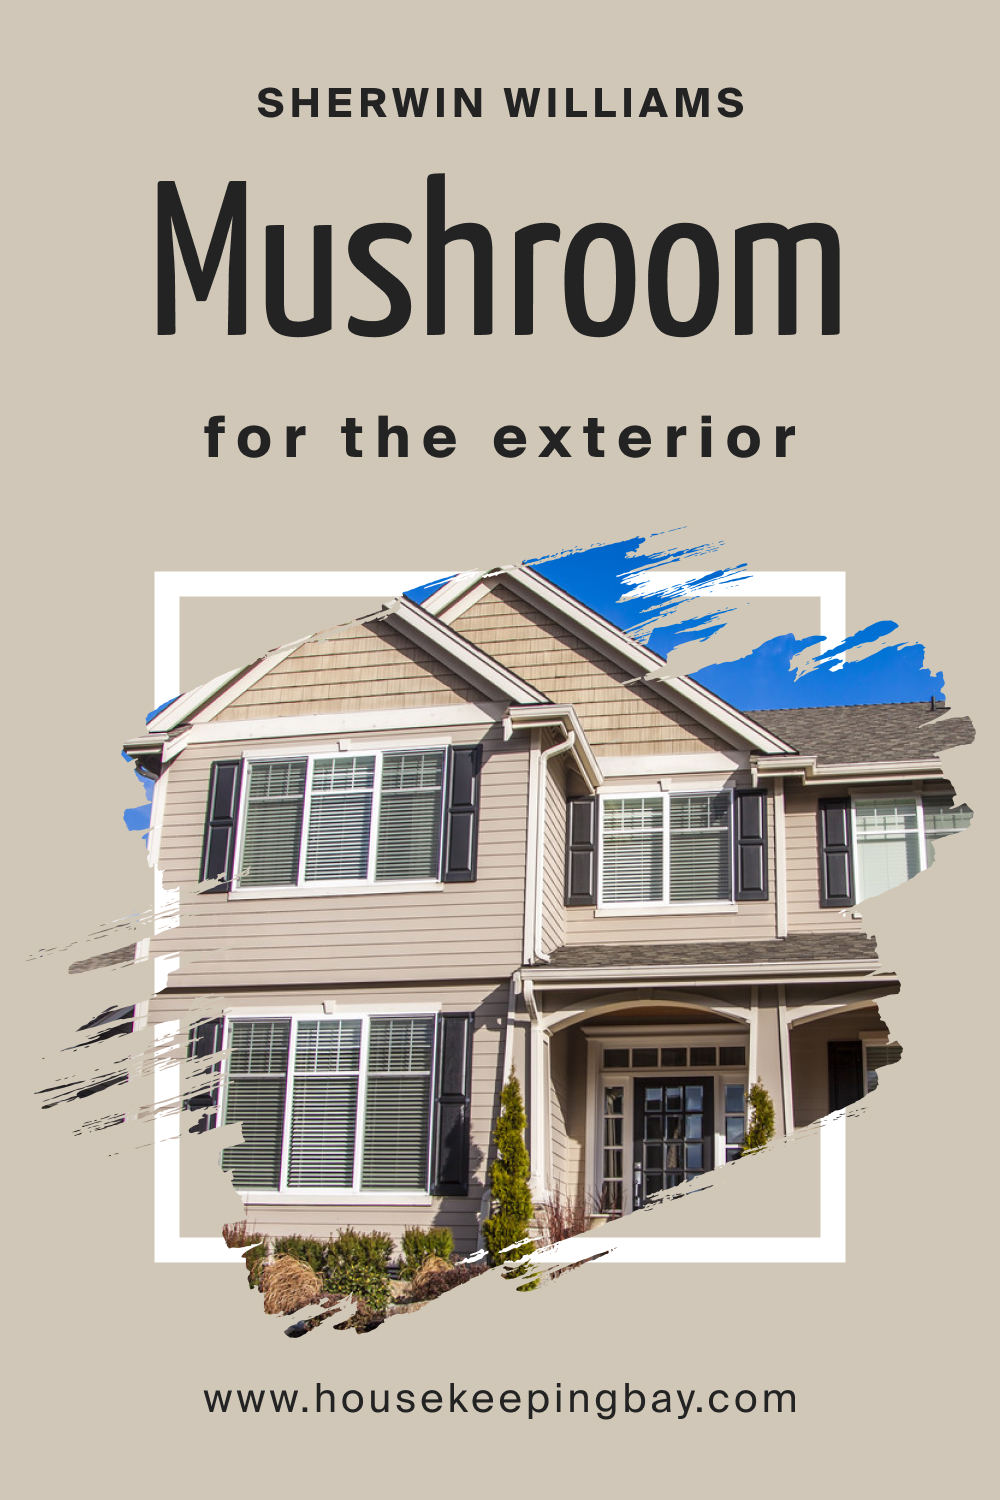 Sherwin Williams. SW Mushroom For the exterior